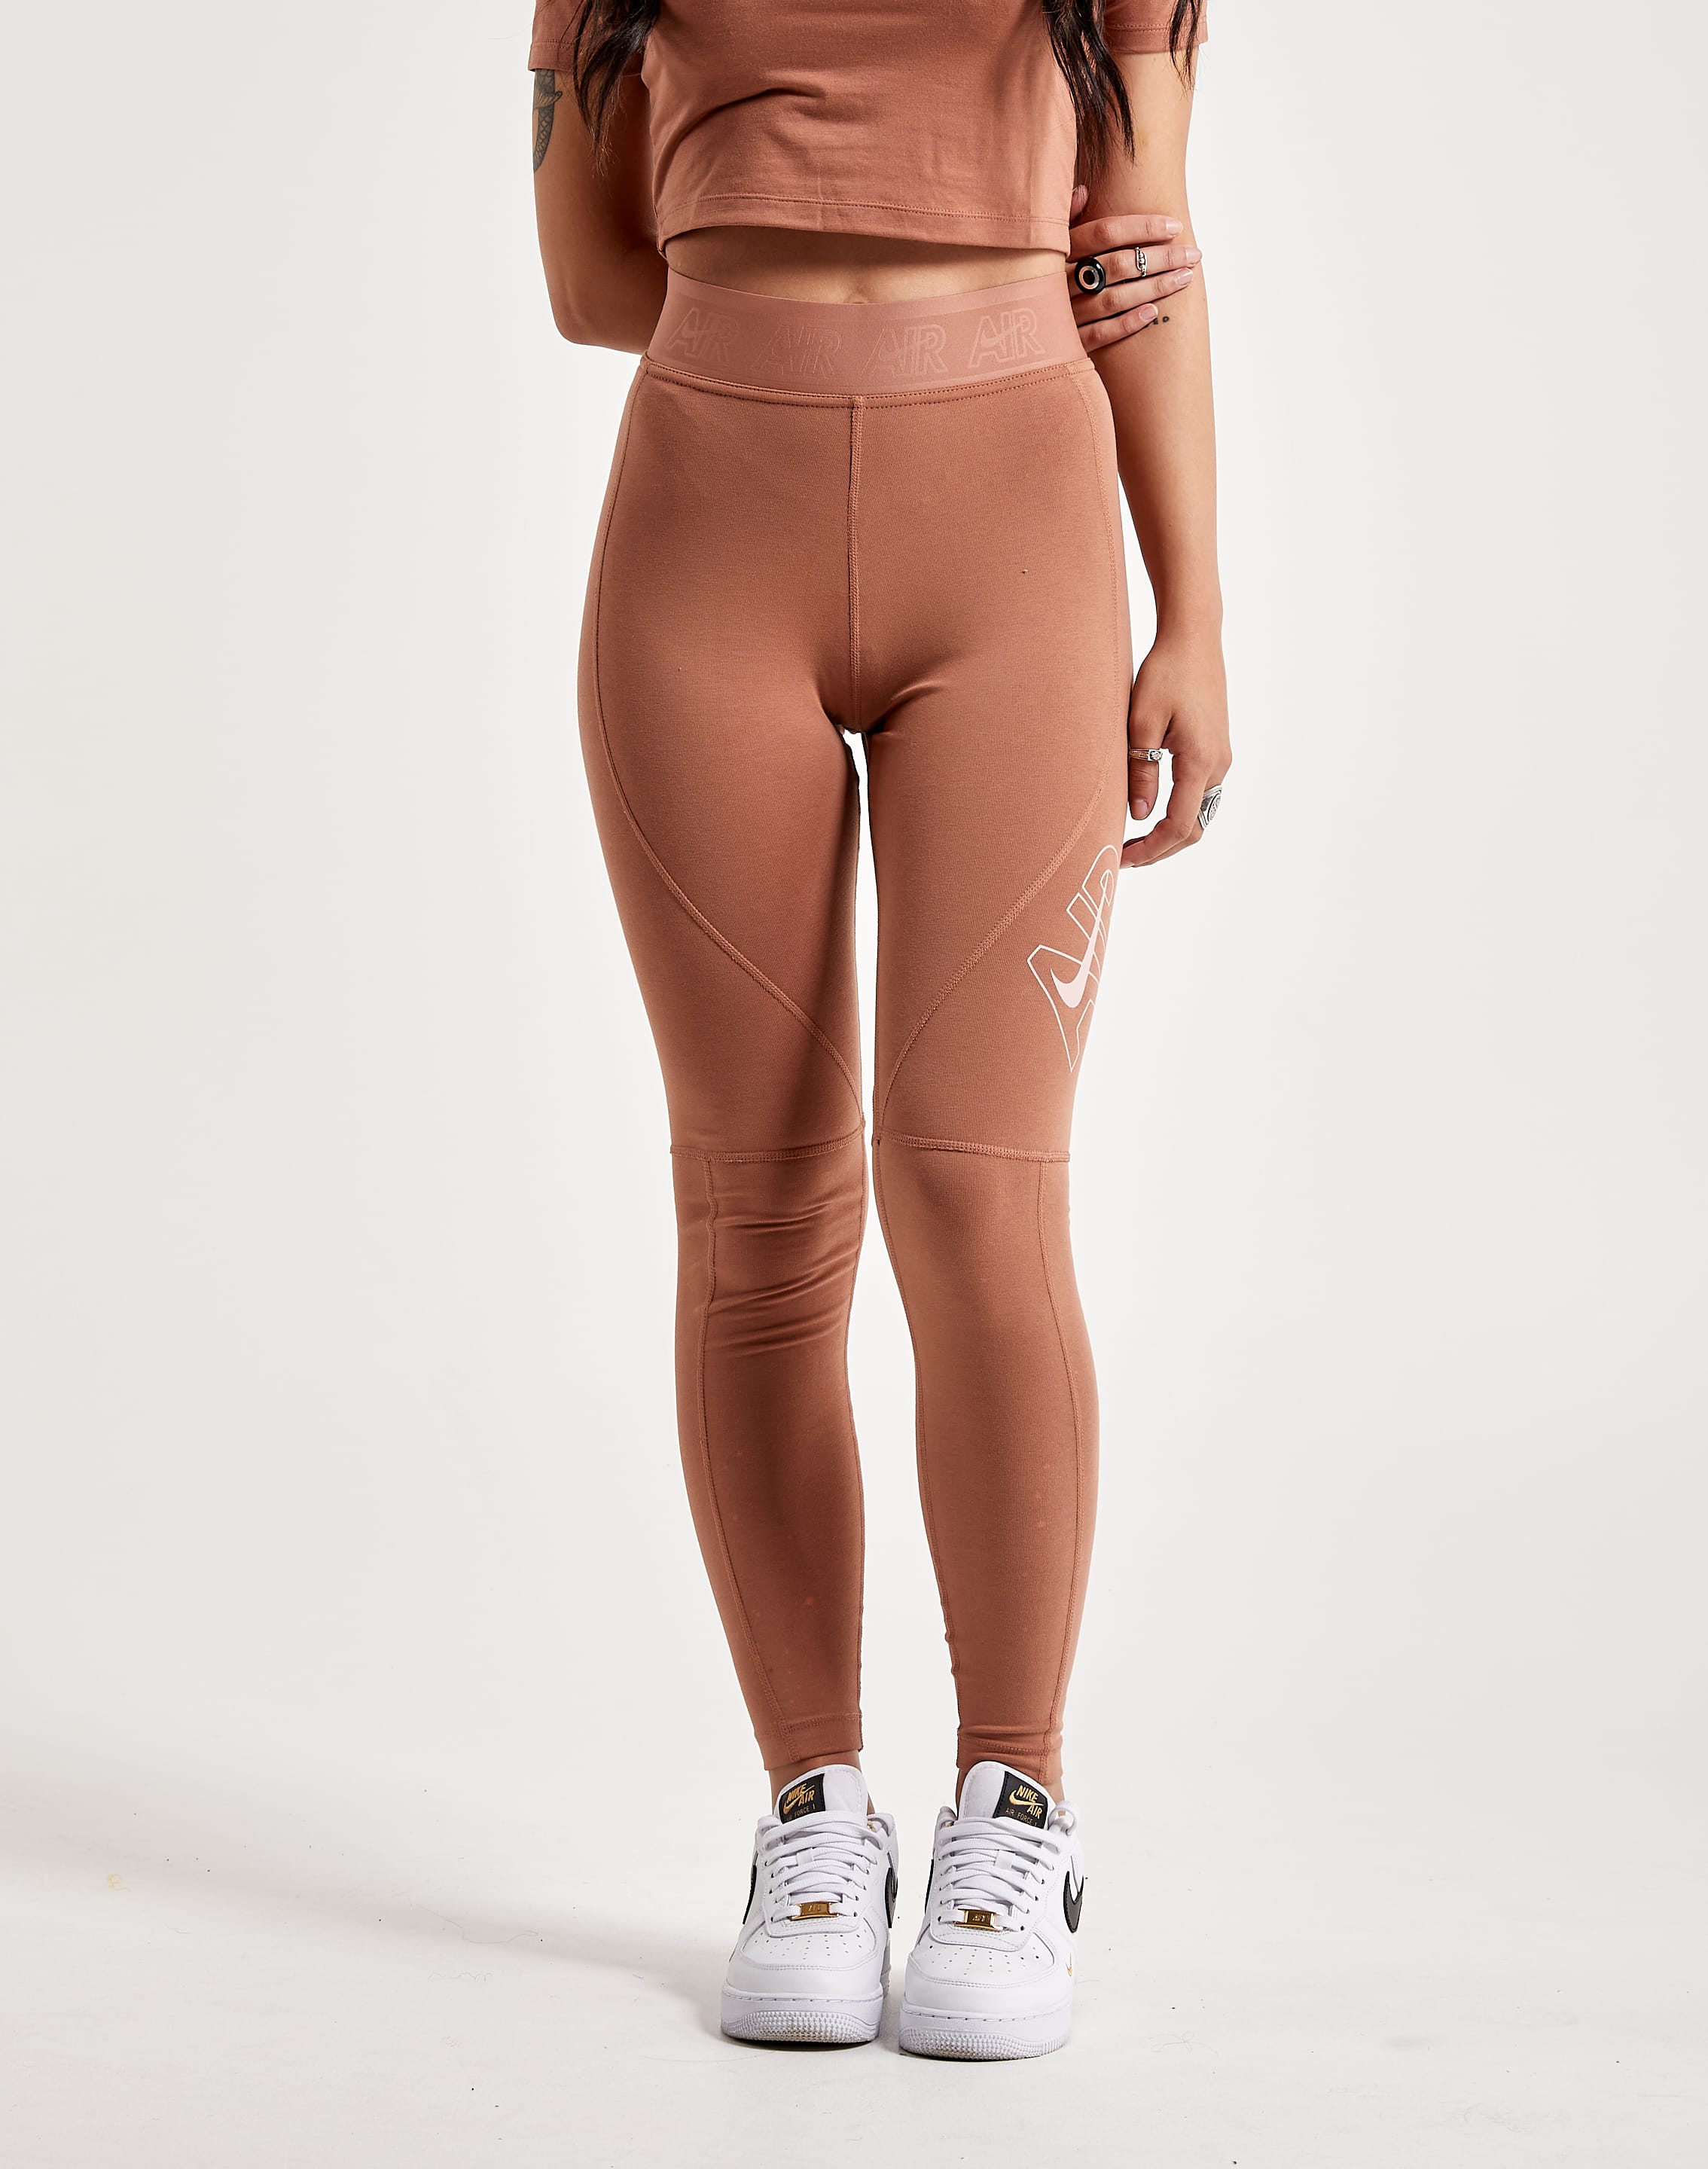 Sale  Brown Nike Leggings - Only Show Exclusive Items - JD Sports Global